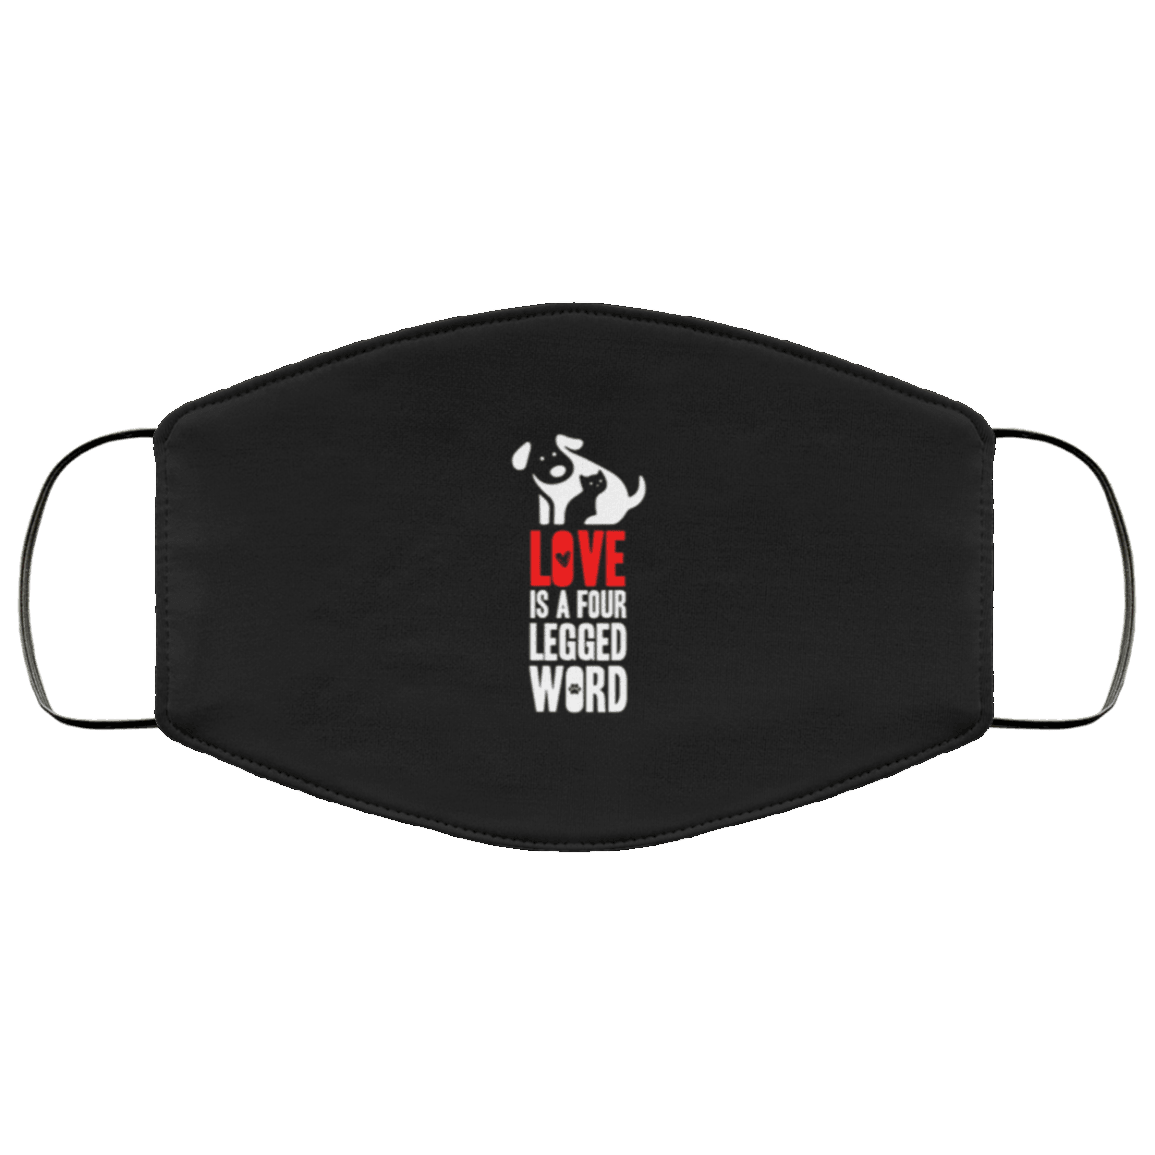 Designs by MyUtopia Shout Out:Love Is A Four Legged Word Dog Cat Adult Fabric Face Mask with Elastic Ear Loops,3 Layer Fabric Face Mask / Black / Adult,Fabric Face Mask